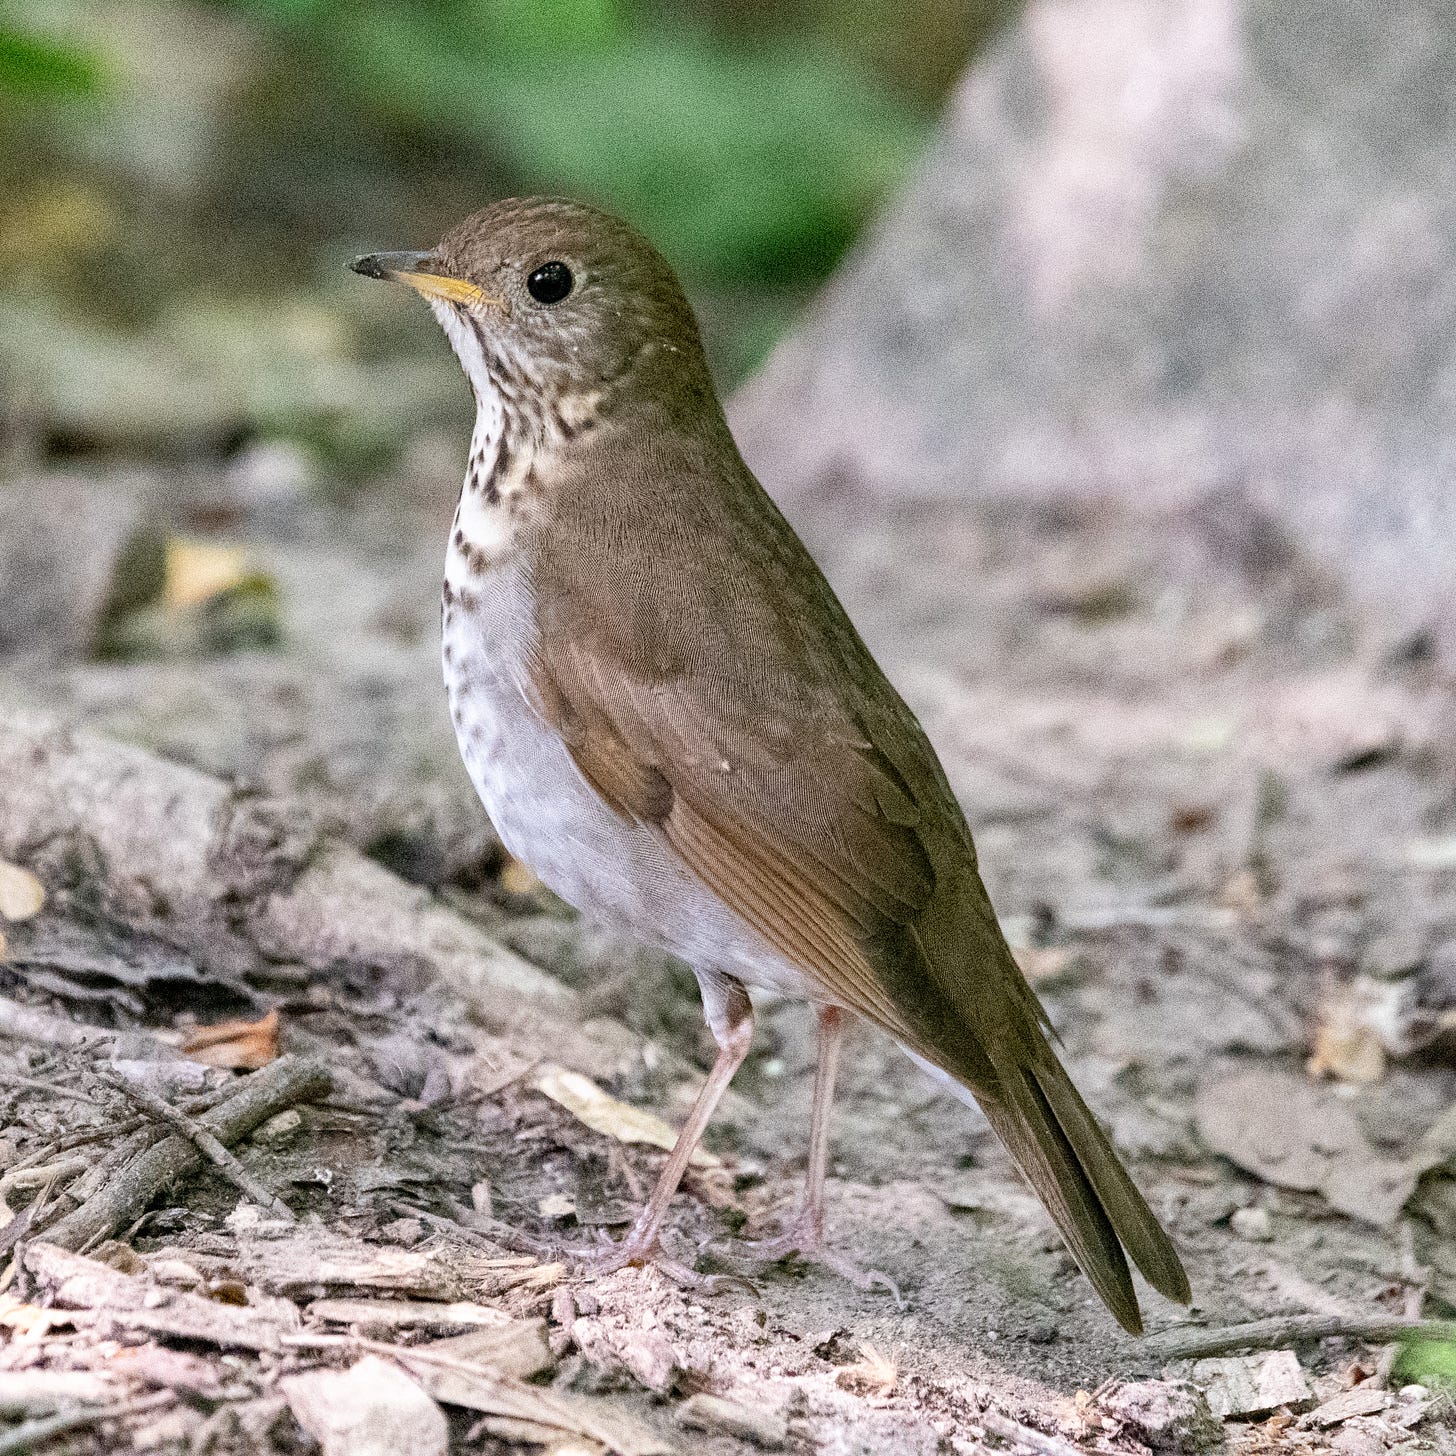 A Bicknell's thrush standing tall on ground littered with leaf debris and twigs